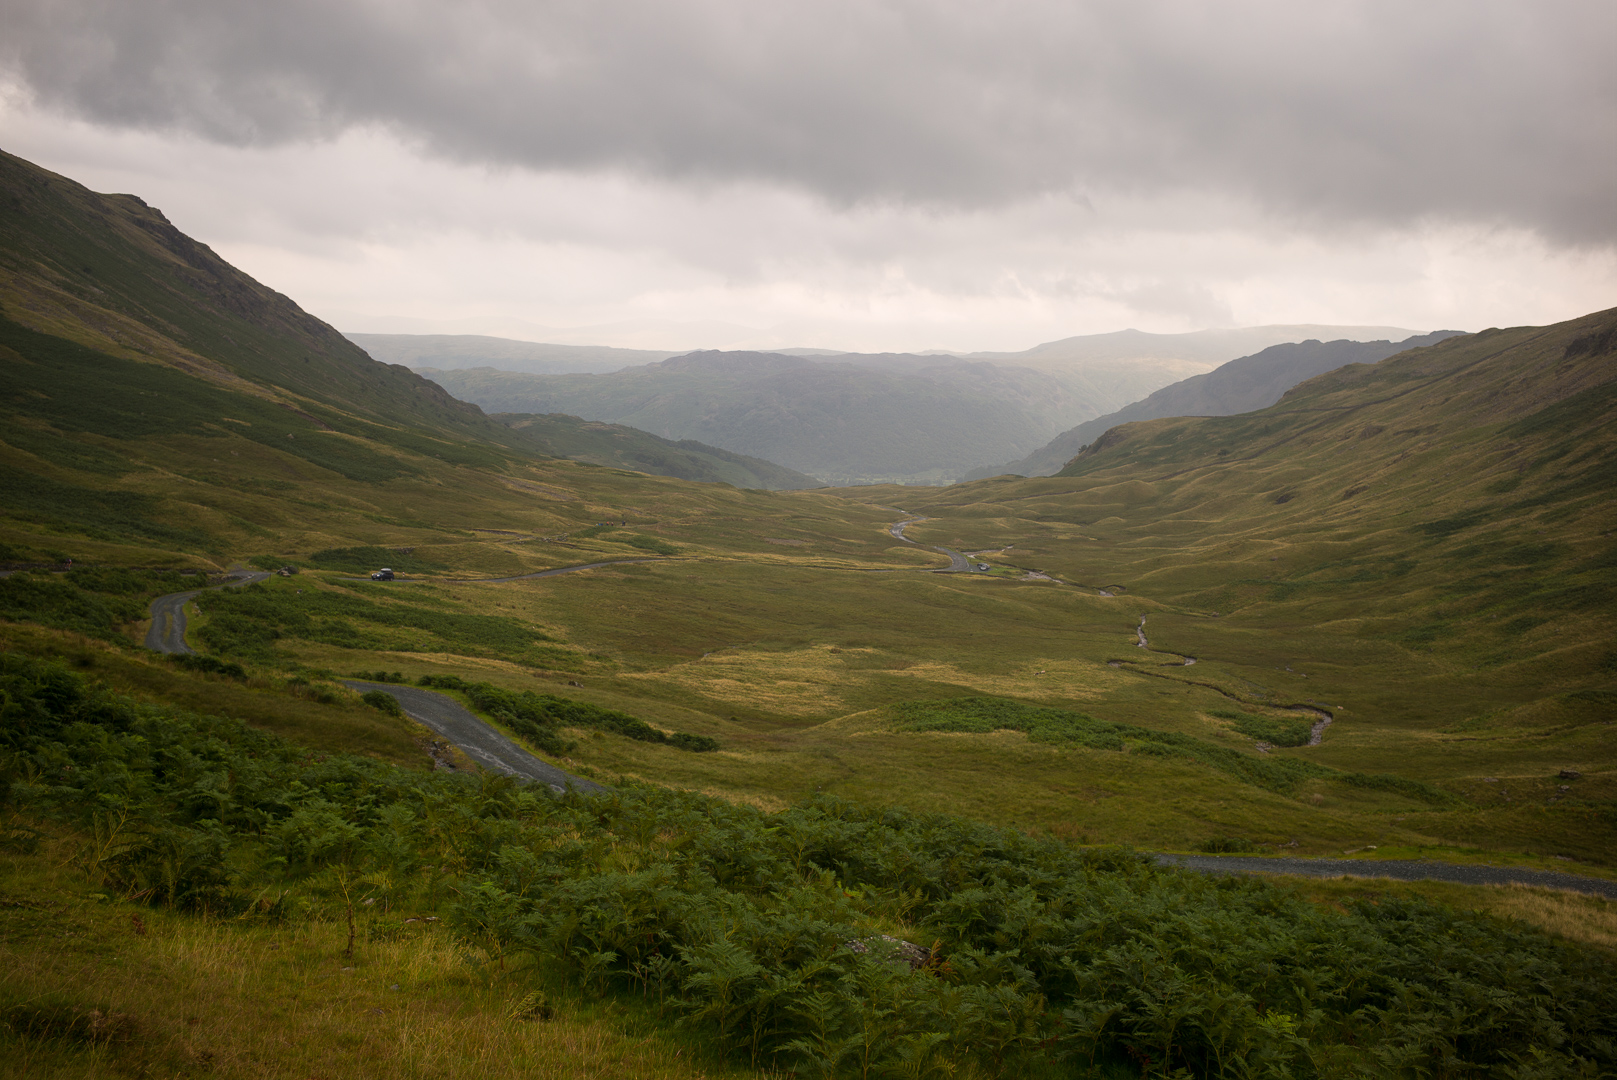 The weather still persists for a bit as we move on from Honister Hause (the old slate mining centre).